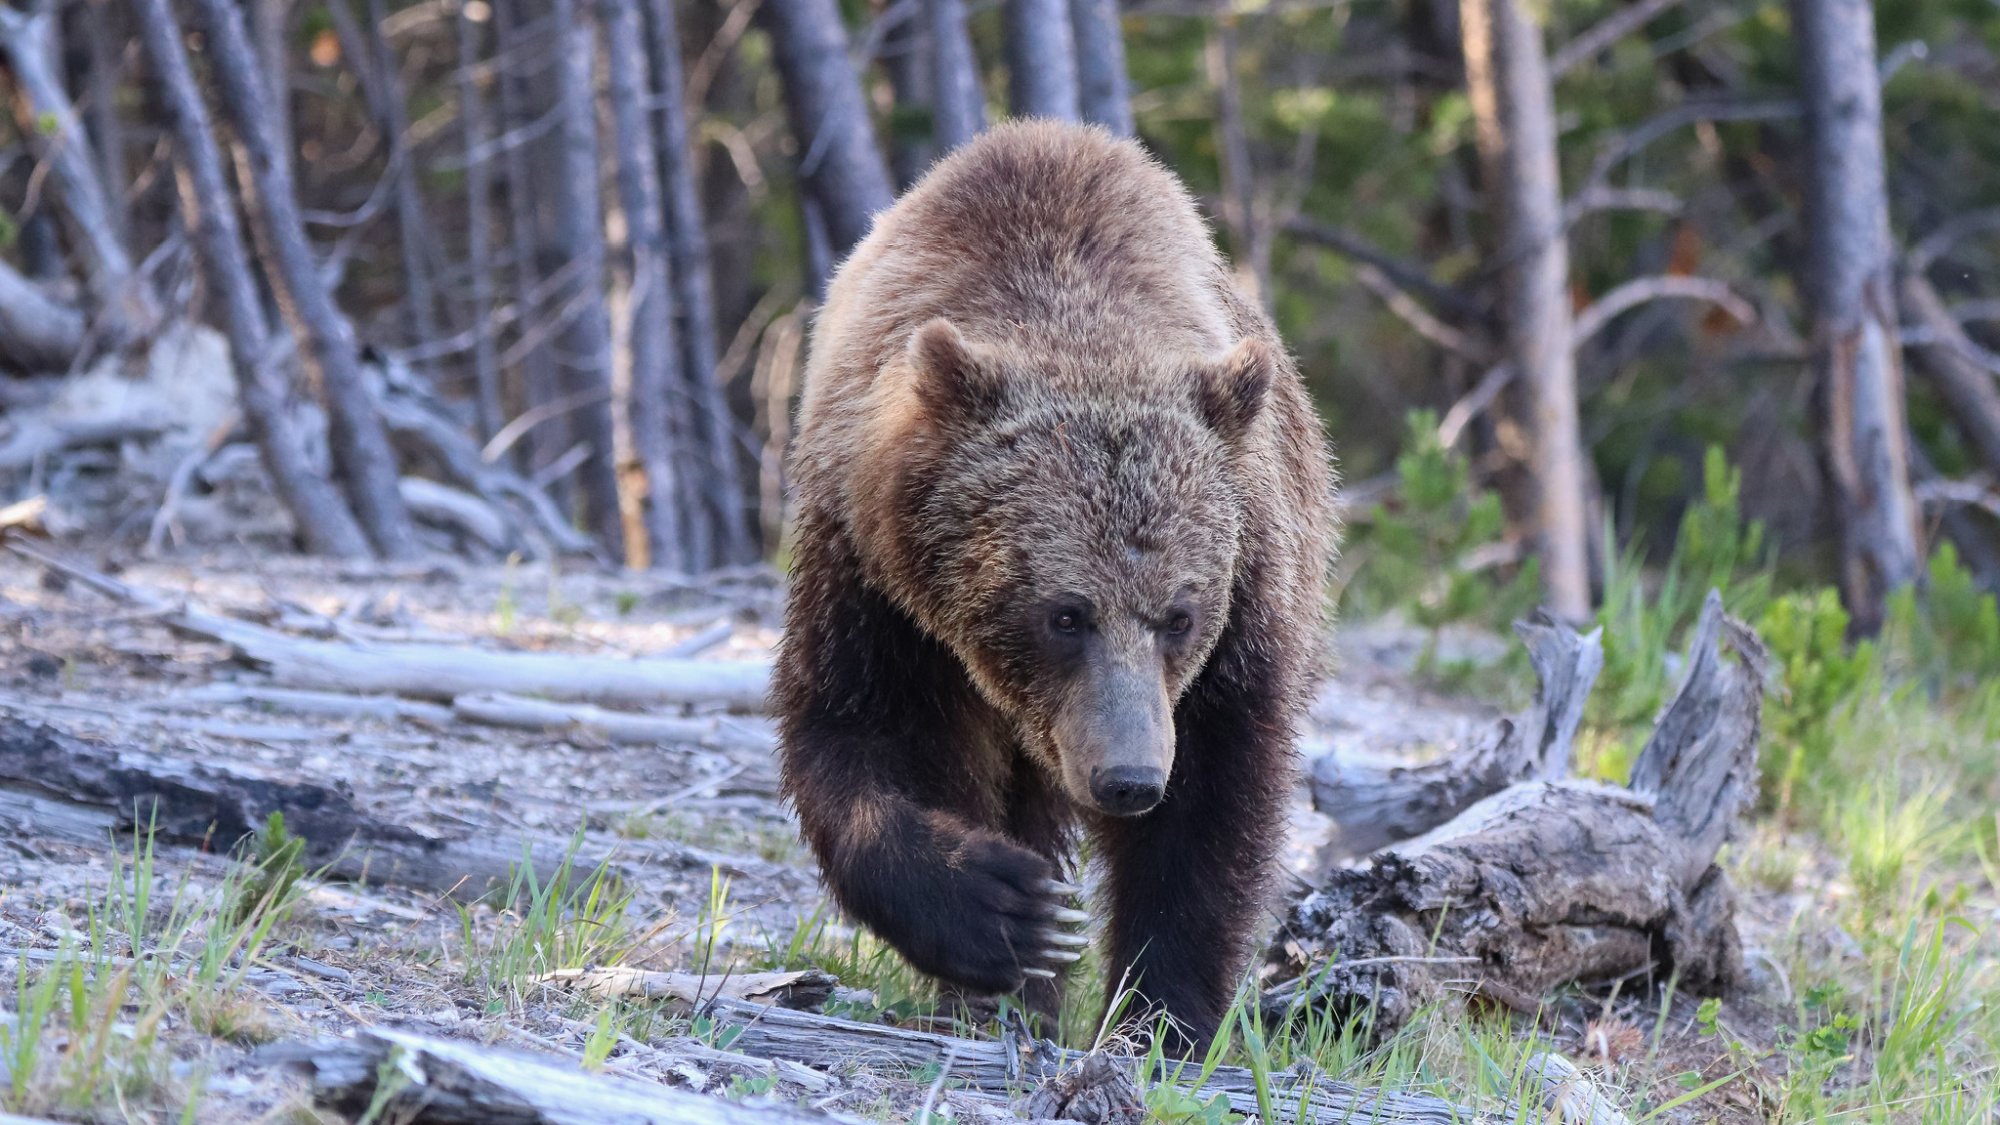 A grizzly bear walks over dead timber in the woods.